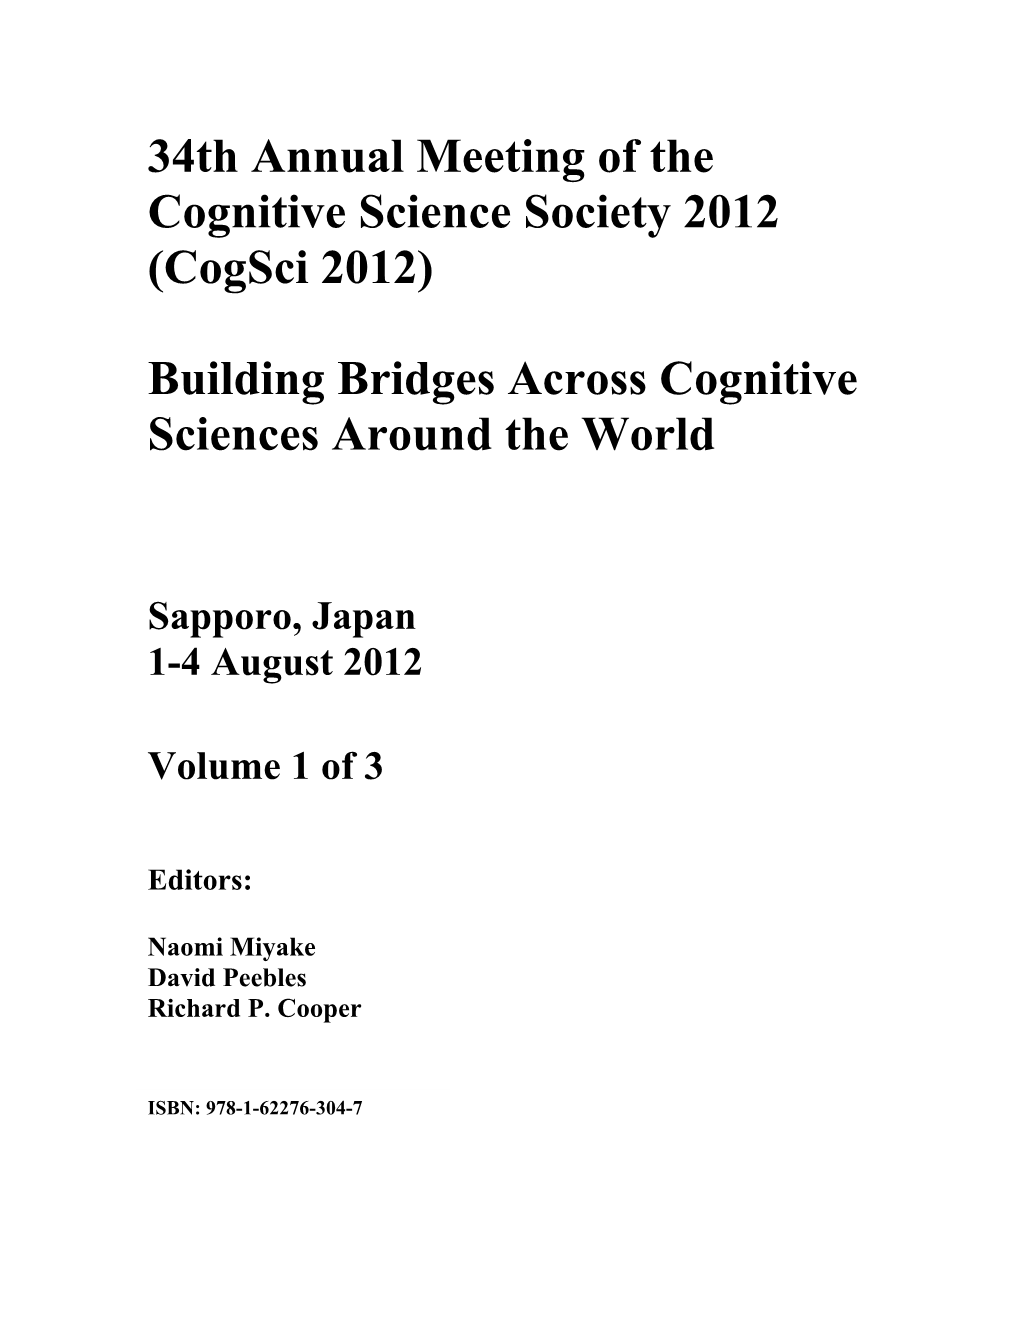 34Th Annual Meeting of the Cognitive Science Society 2012 (Cogsci 2012)